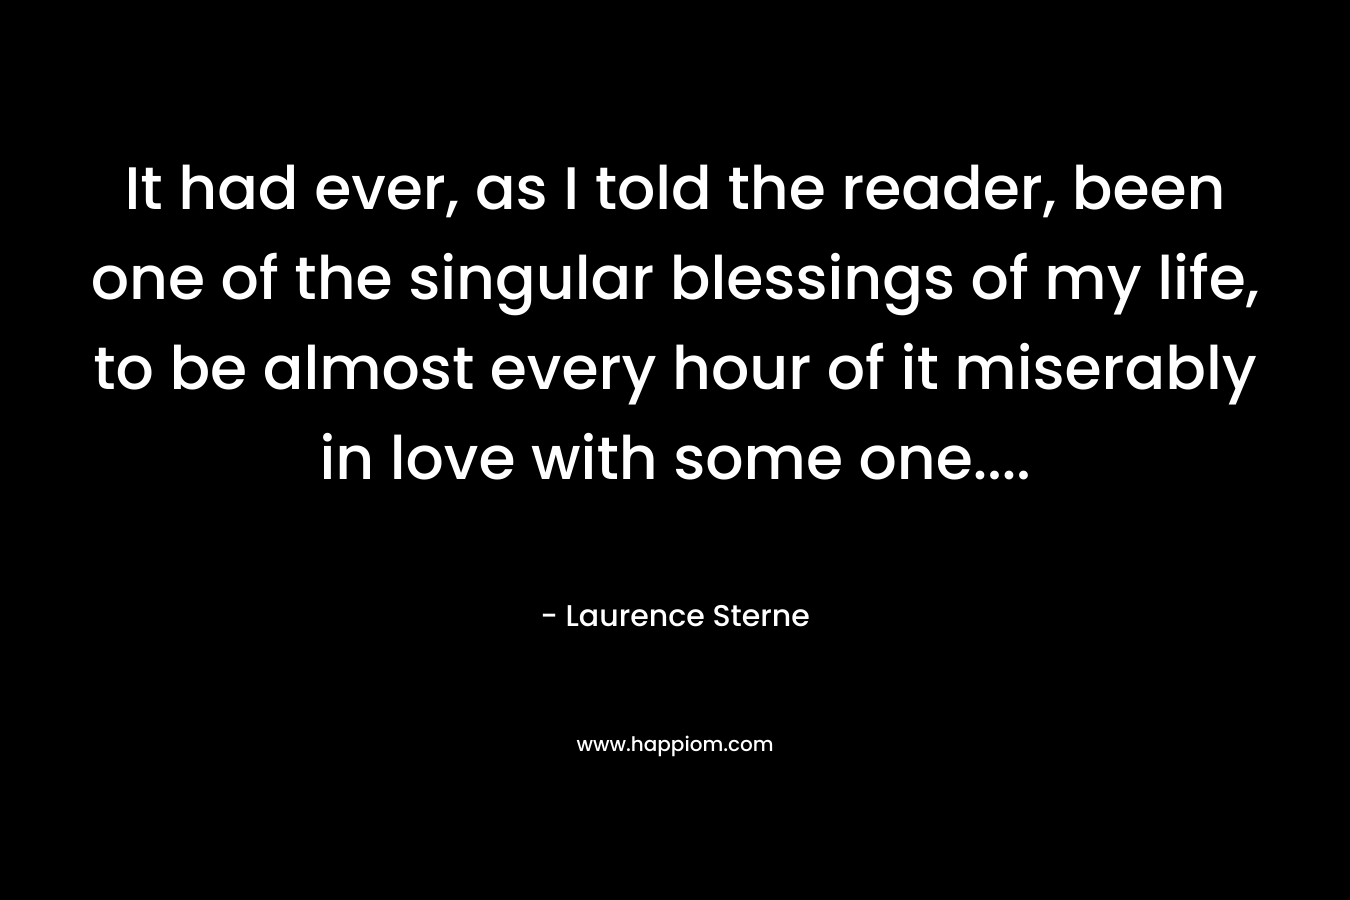 It had ever, as I told the reader, been one of the singular blessings of my life, to be almost every hour of it miserably in love with some one…. – Laurence Sterne